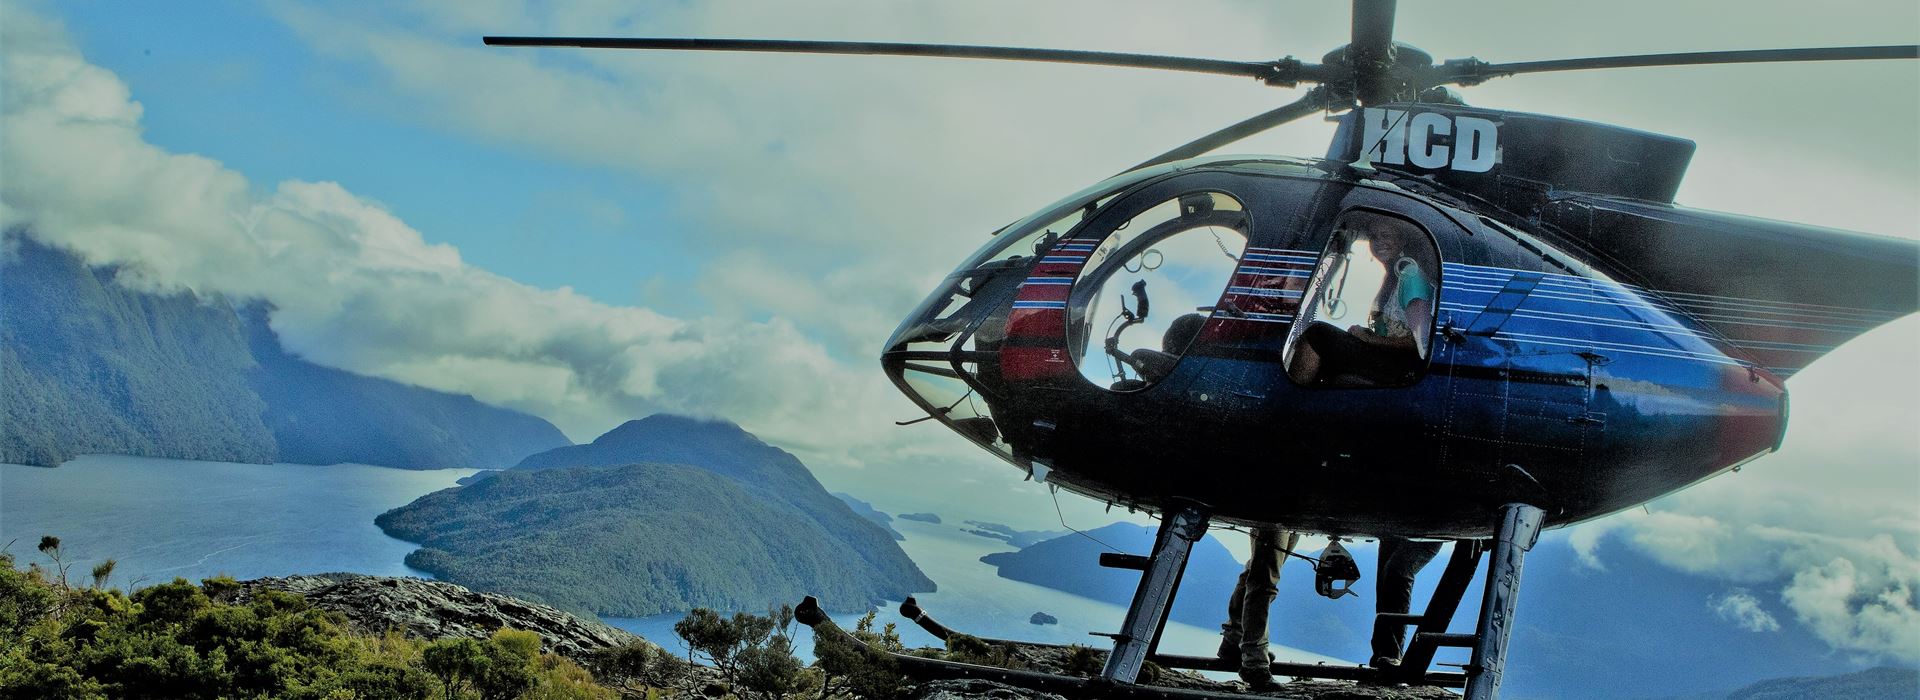 8 Day - Thrill Seeker Tour: South Island Adventure Experience